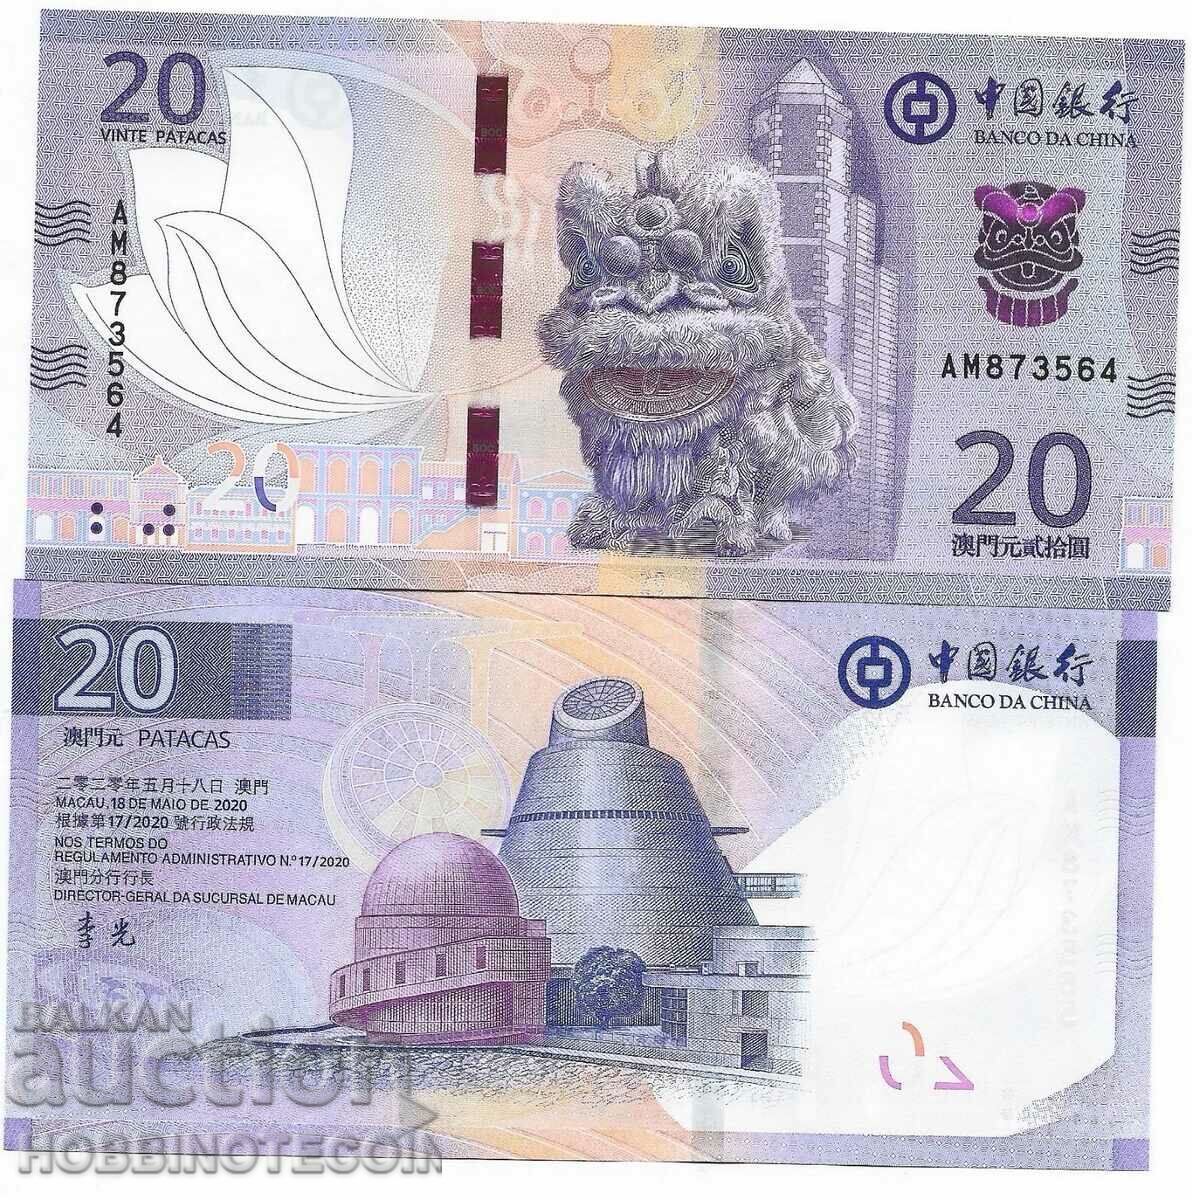 MACAO MACAO 20 Pataka issue issue 2023 2024 NEW UNC 1